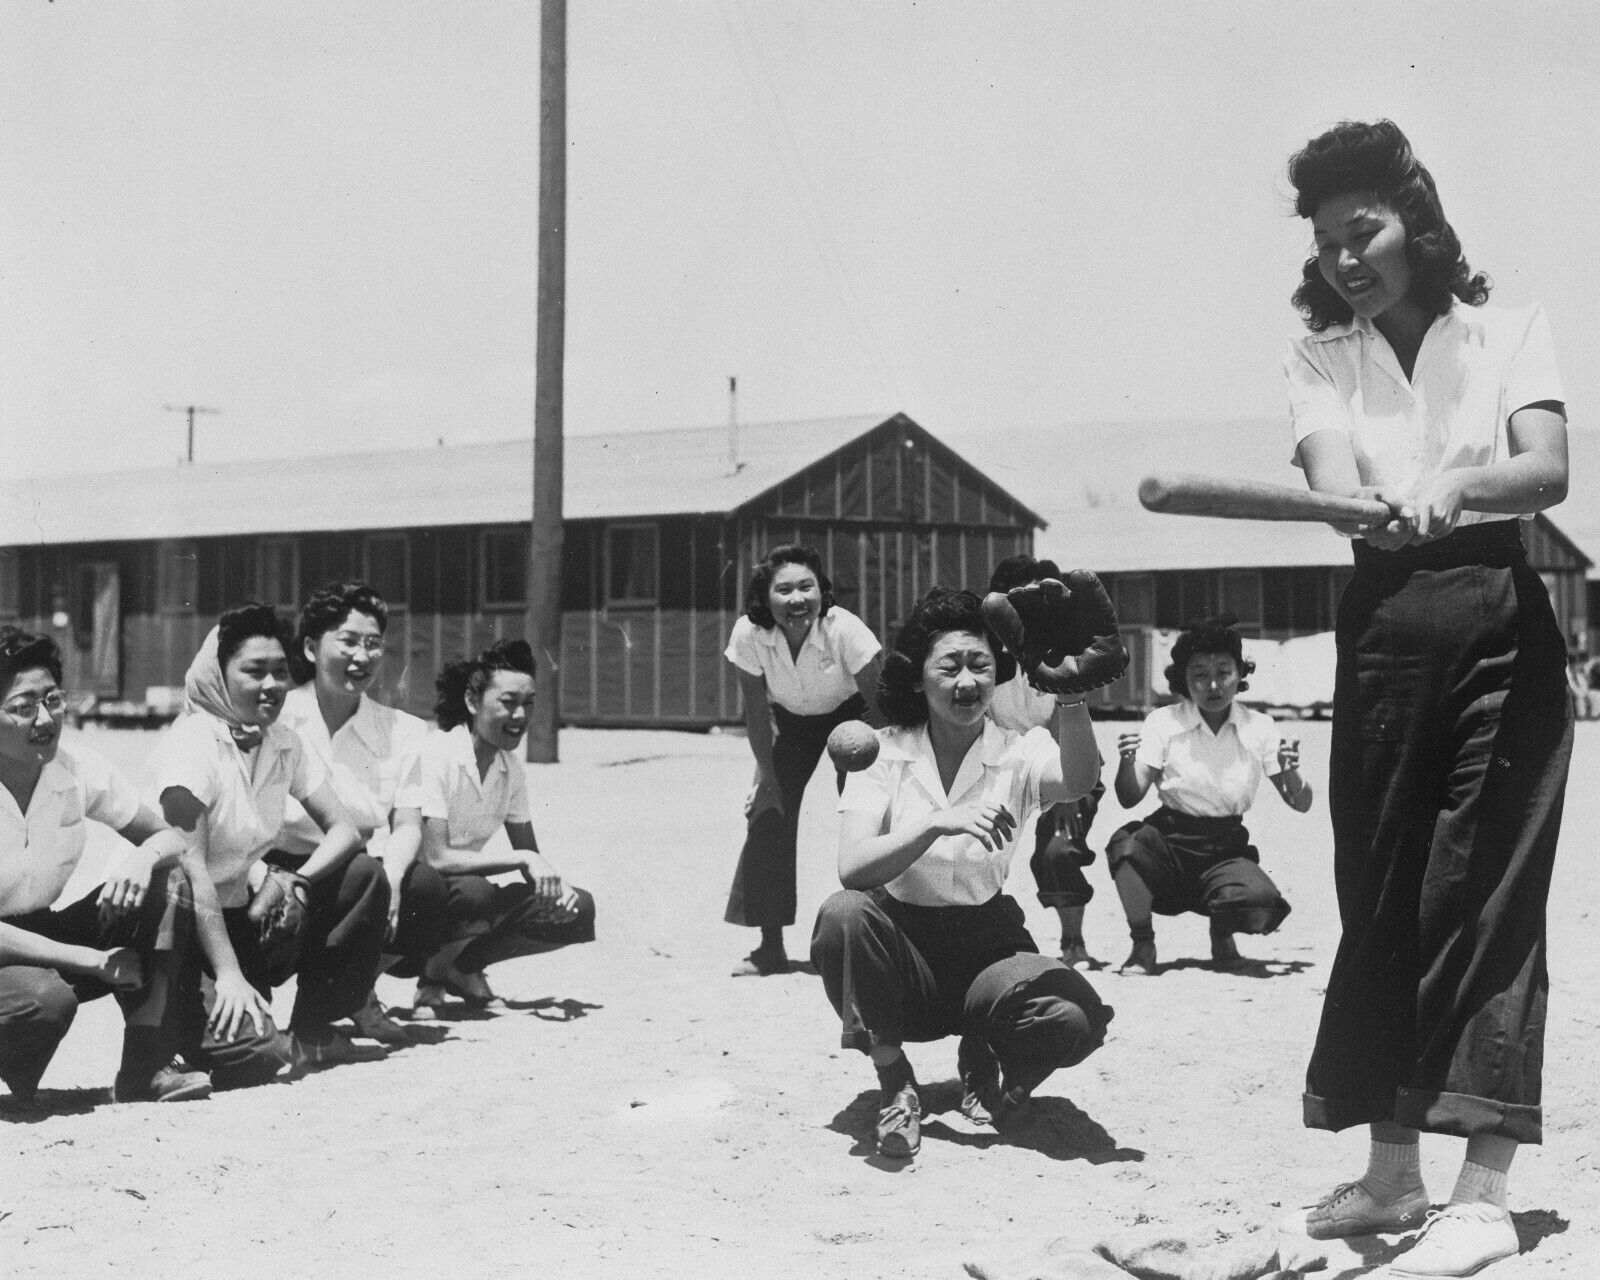 WW2 War Time 8x10 Photo Japanese Women Play Ball at Relocation Center California